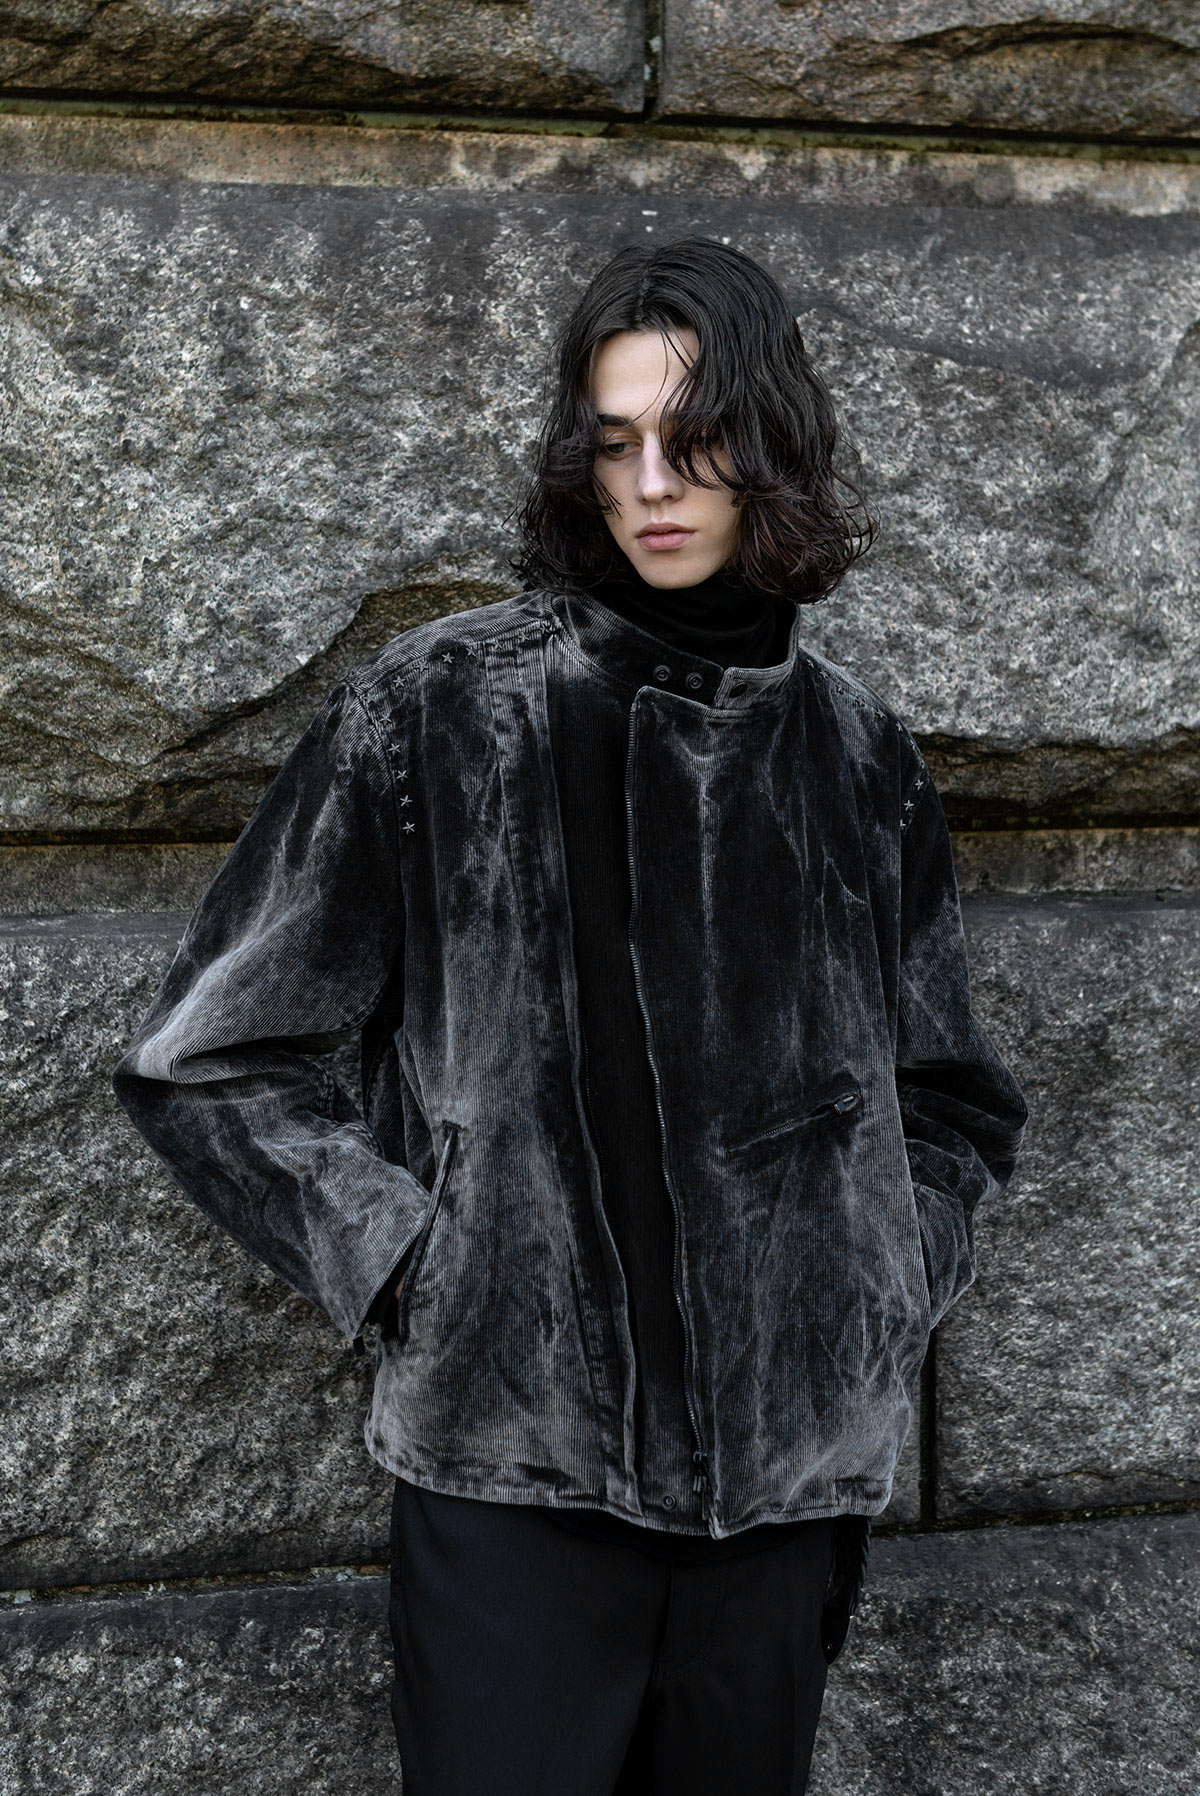 〈NEEDLES〉&〈REBUILD by NEEDLES〉SPECIAL RELEASE for NEPENTHES STORES 12.10（SAT）11:00 JST - ON SAL